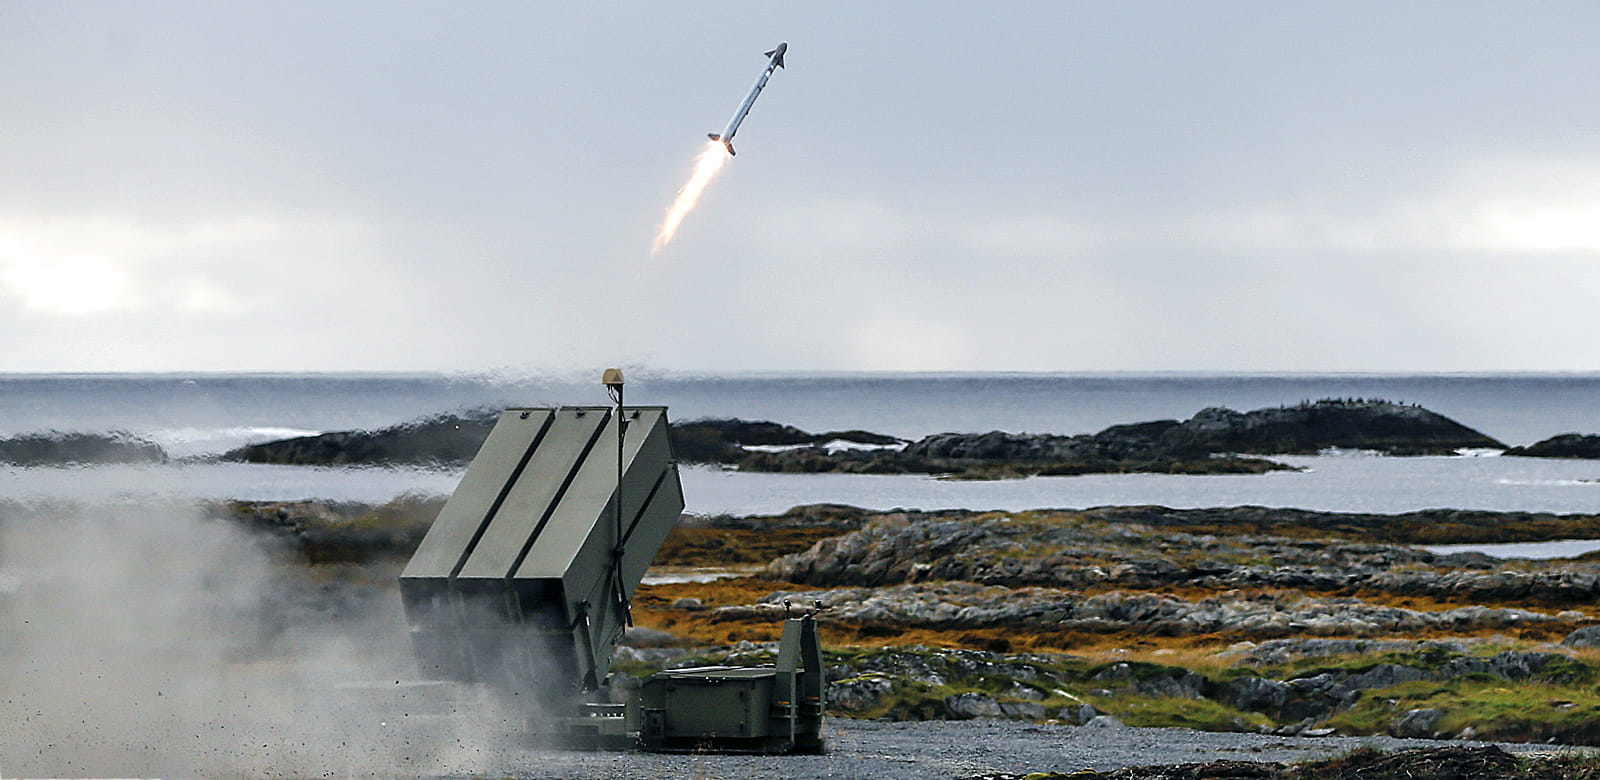 An AIM-9X SIDEWINDER missile is fired from a NASAMS air defense system during the SDPE demonstration in Andoya, Norway.